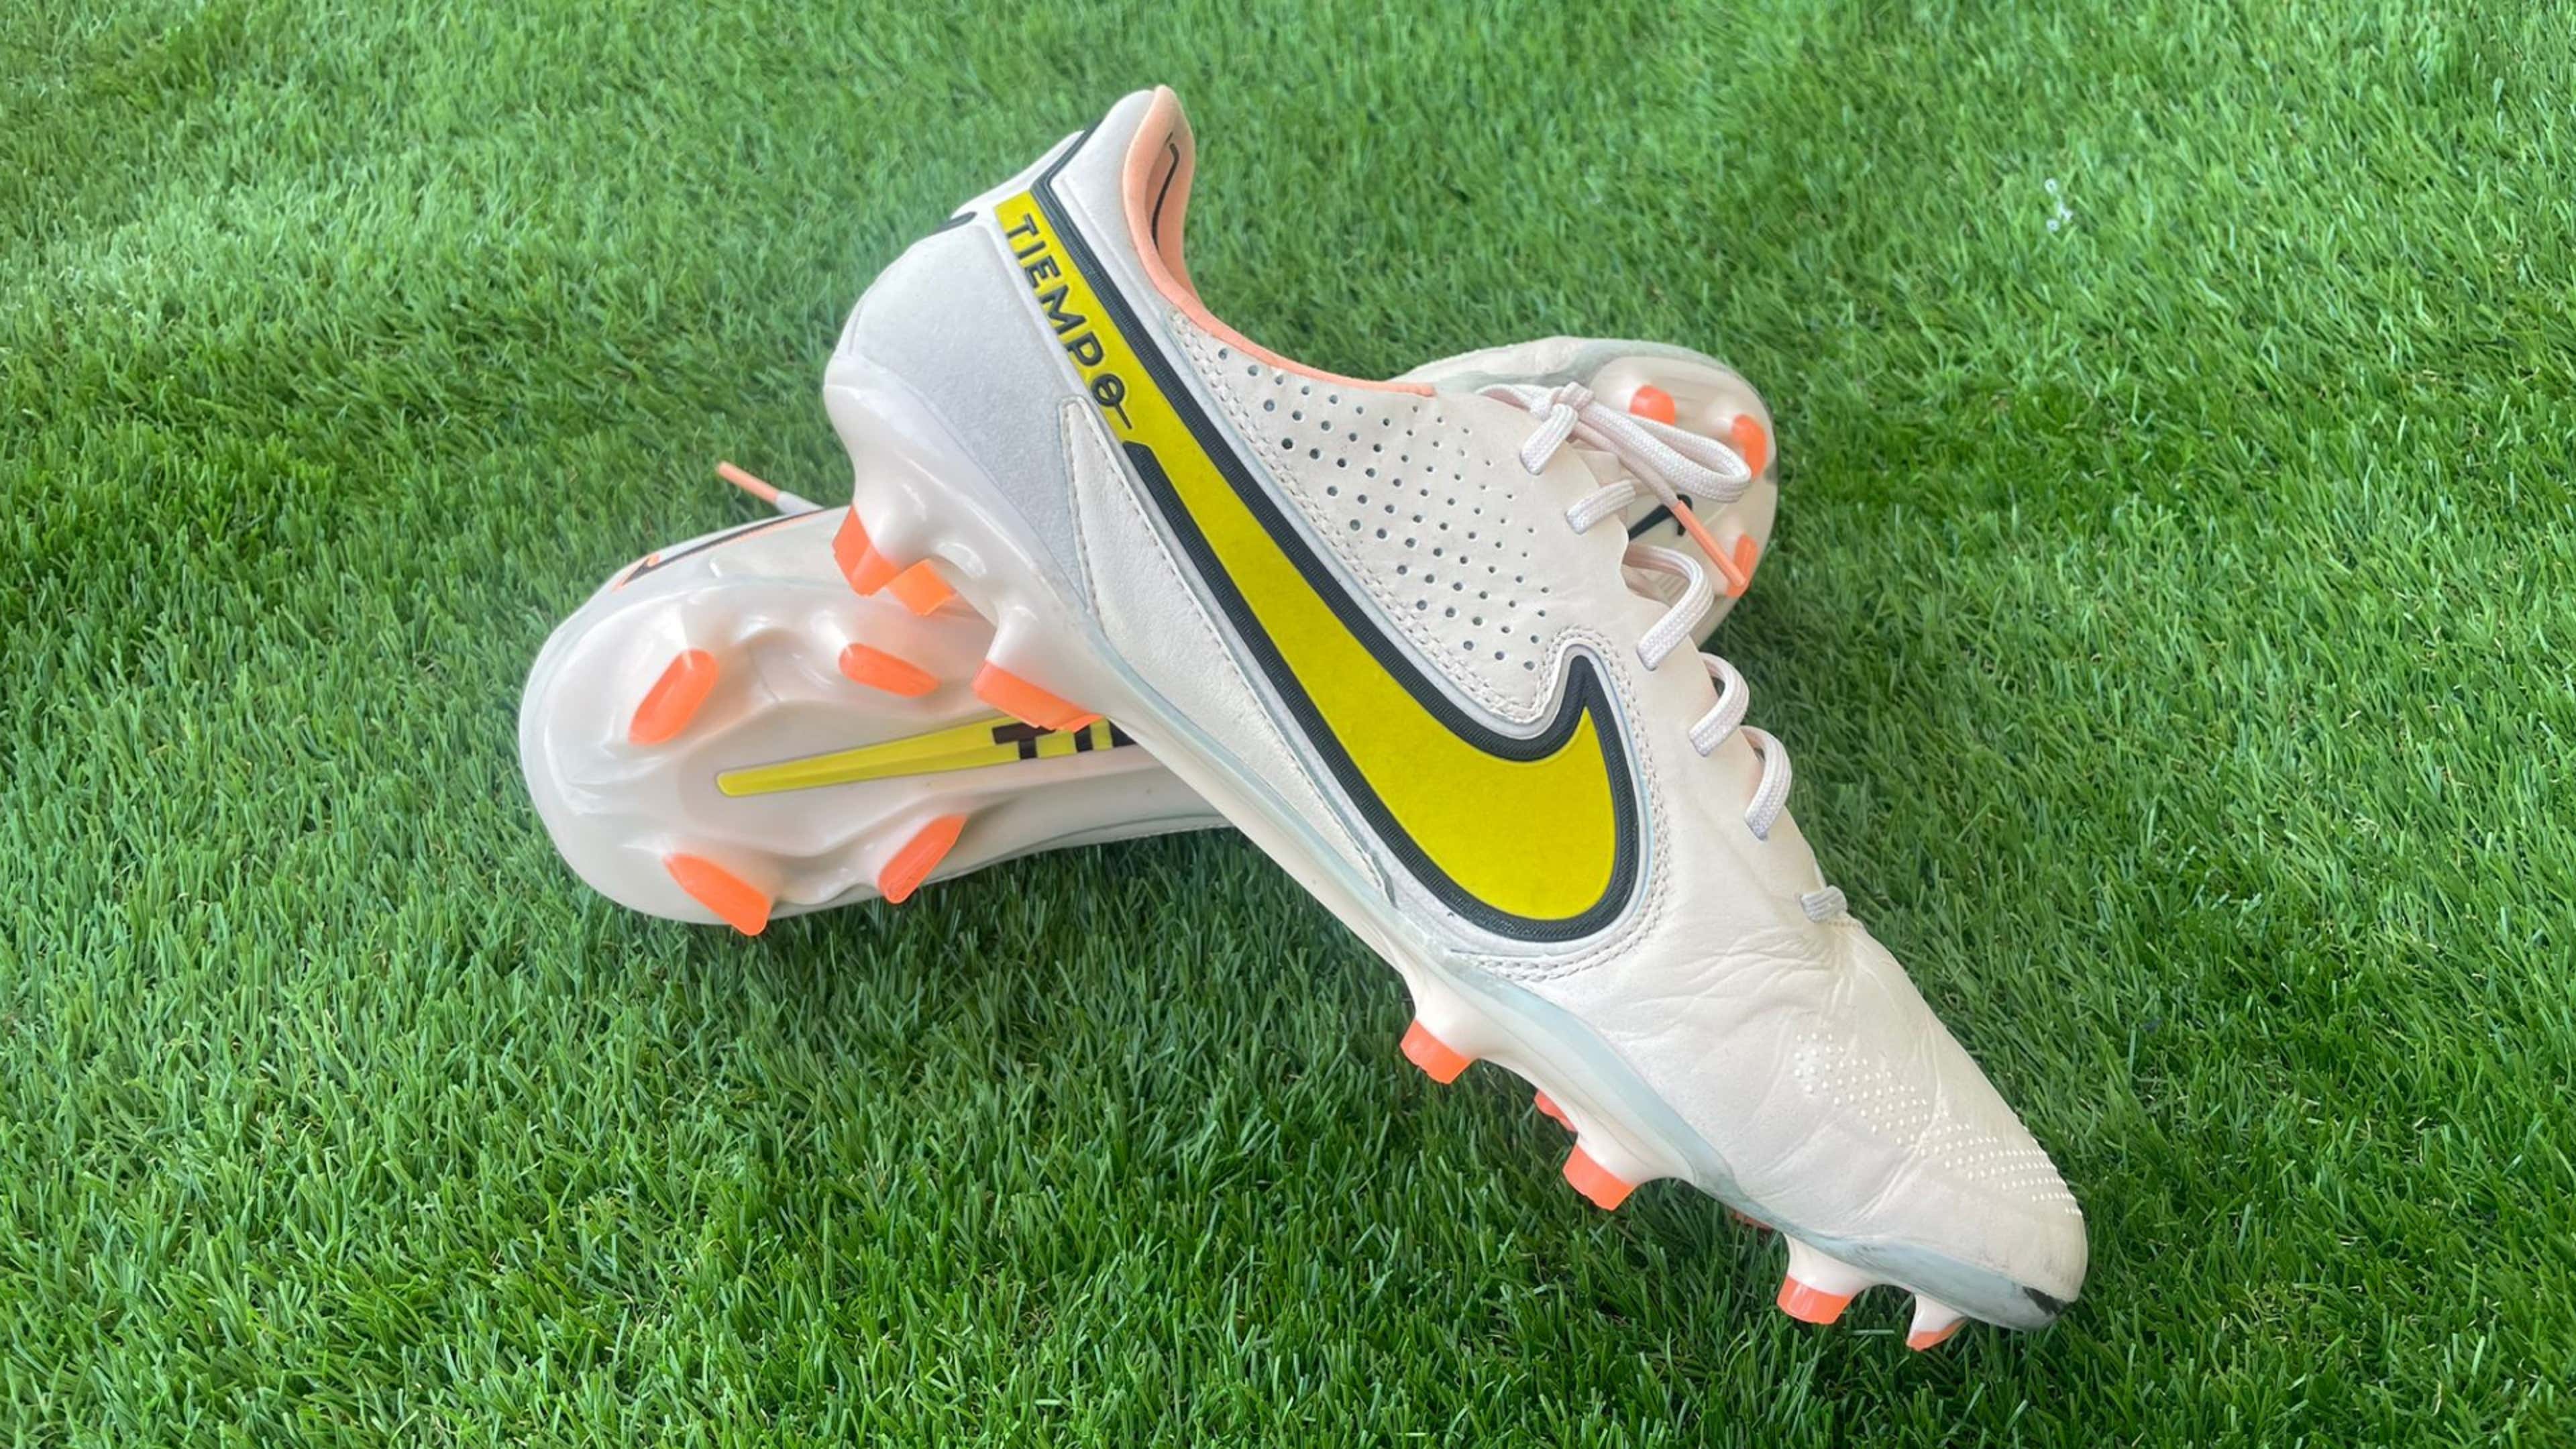 medianoche sequía Picasso Nike Tiempo Legend Elite FG Boots: Our tried & tested review | Goal.com US